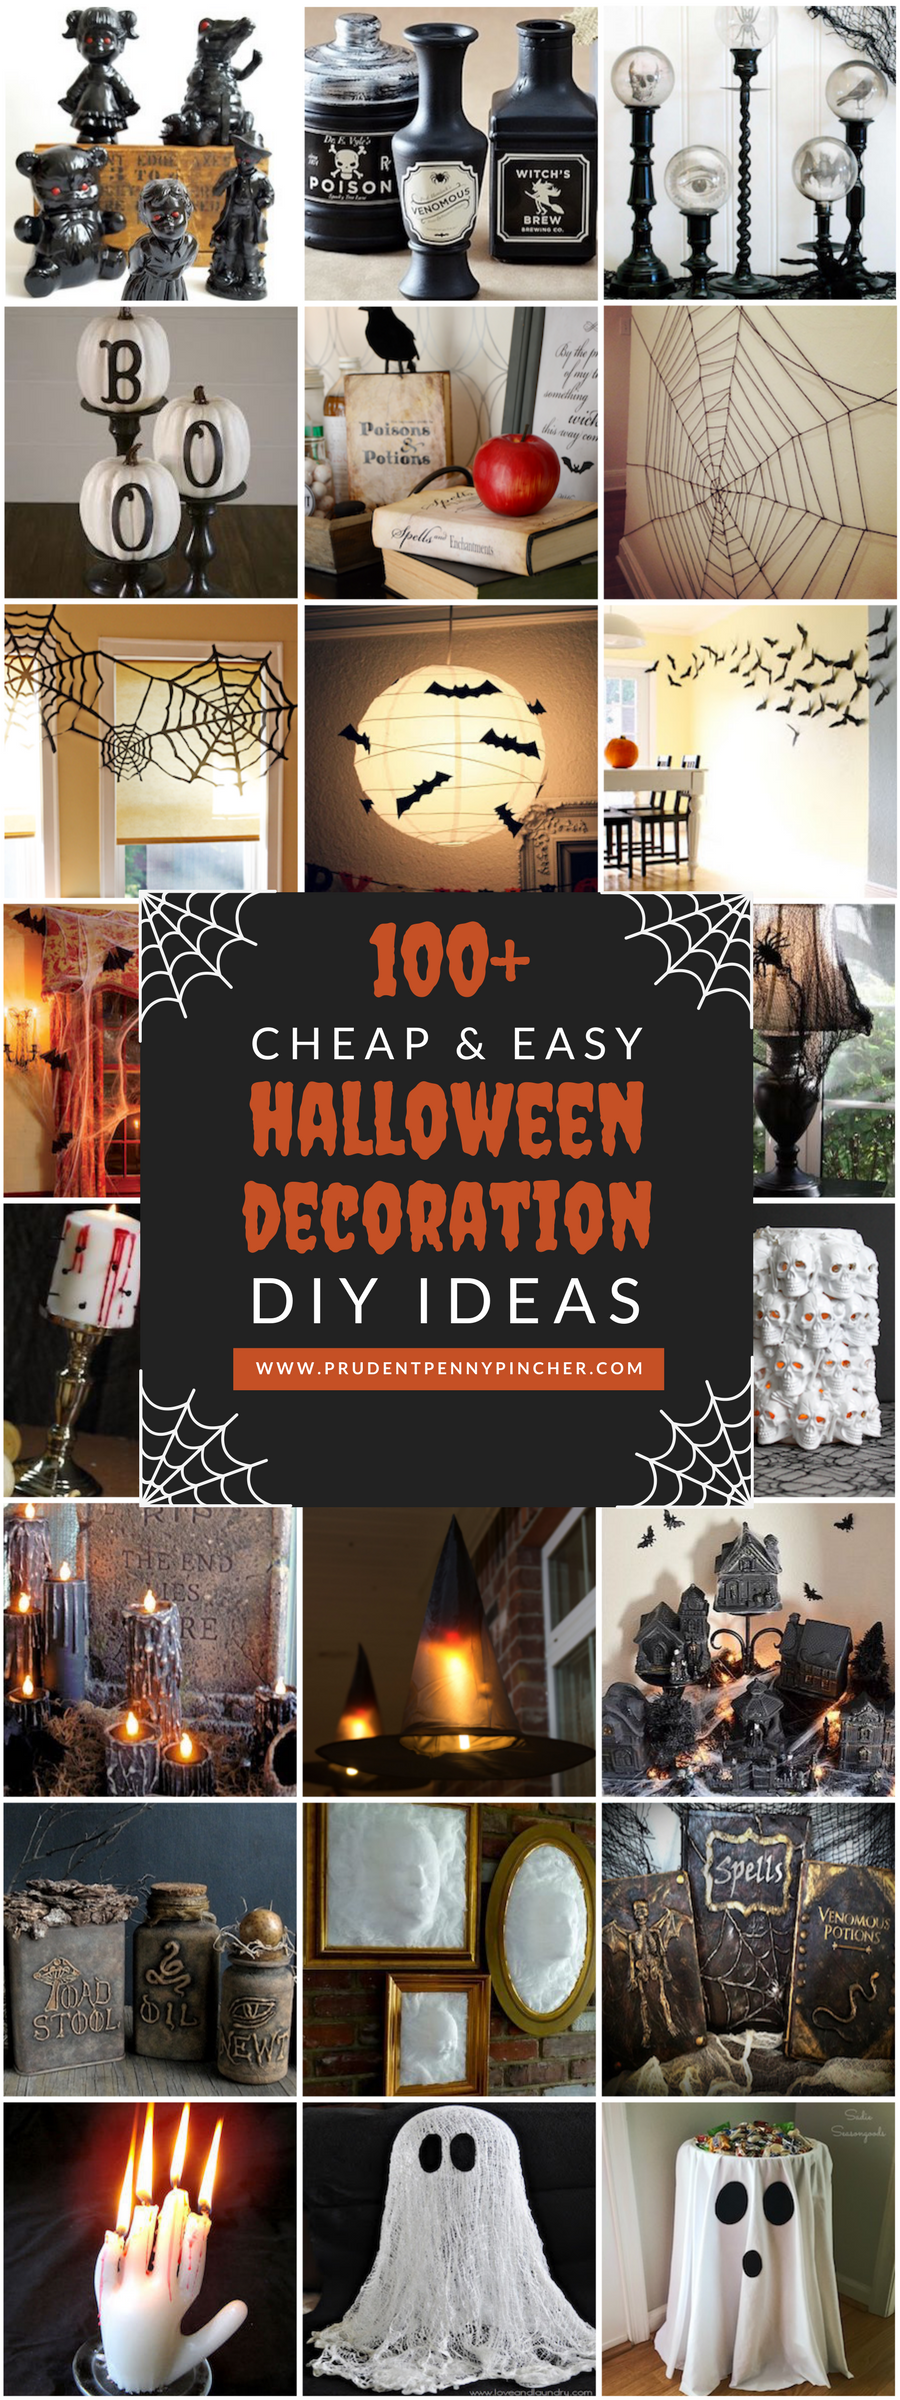 100-cheap-and-easy-halloween-decor-diy-ideas-prudent-penny-pincher